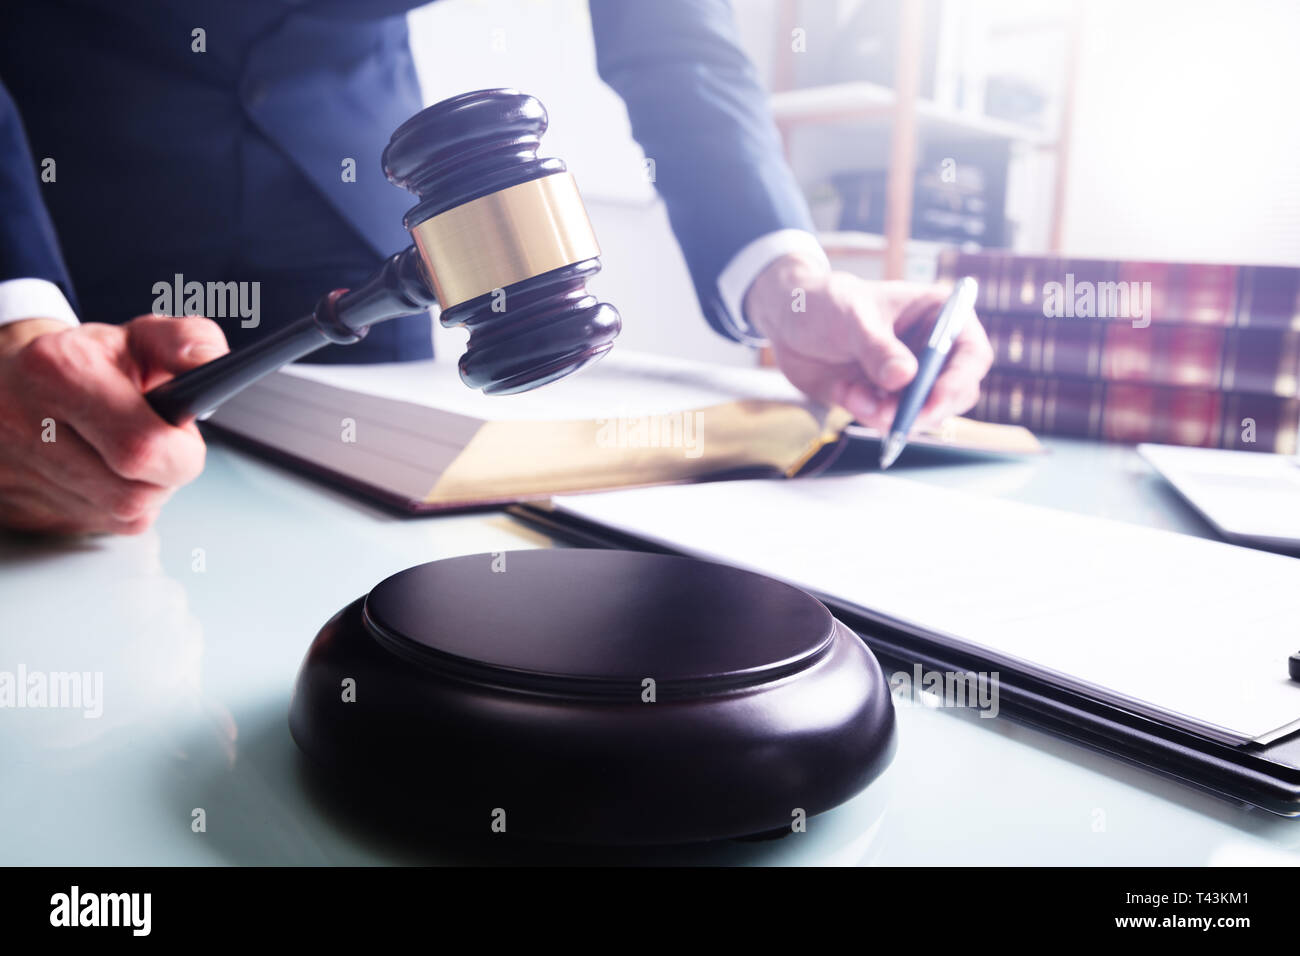 Midsection Of Male Judge In Courtroom Striking Mallet On Sound Block Over Desk Stock Photo